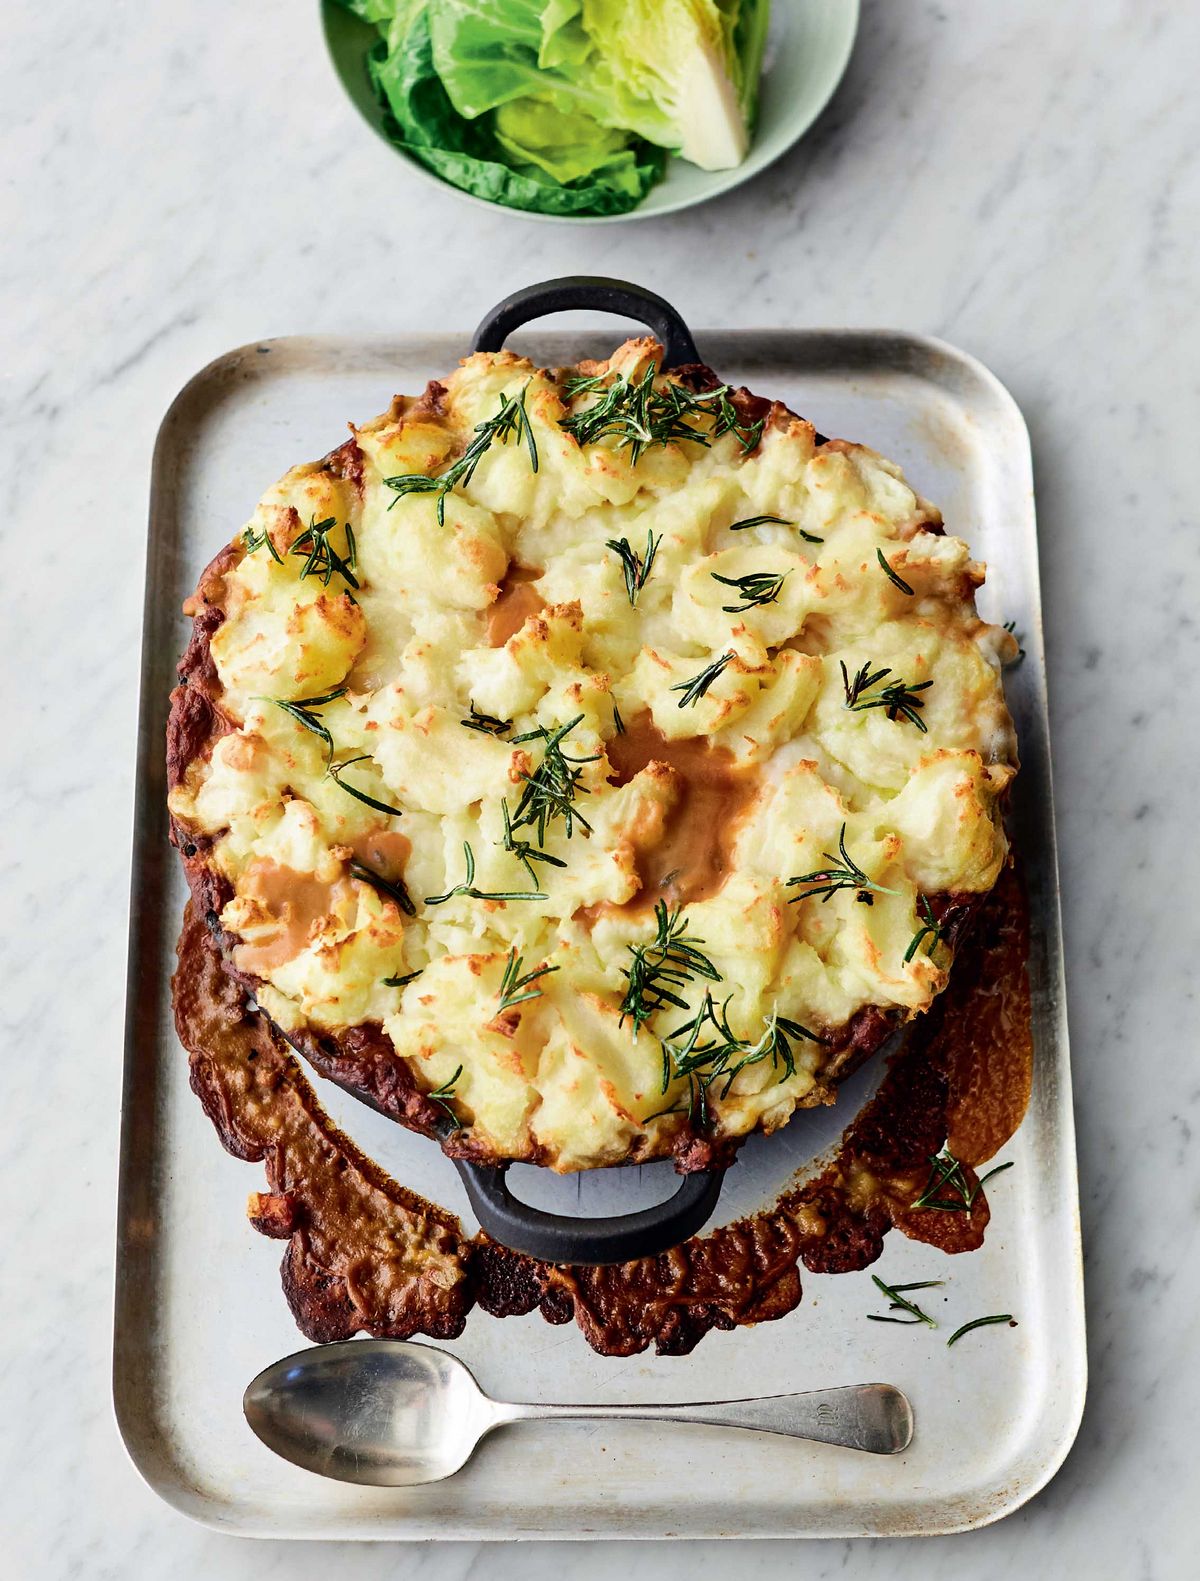 Jamie Oliver’s Allotment Cottage Pie with Root Veg, Porcini Mushrooms, Marmite and Crispy Rosemary